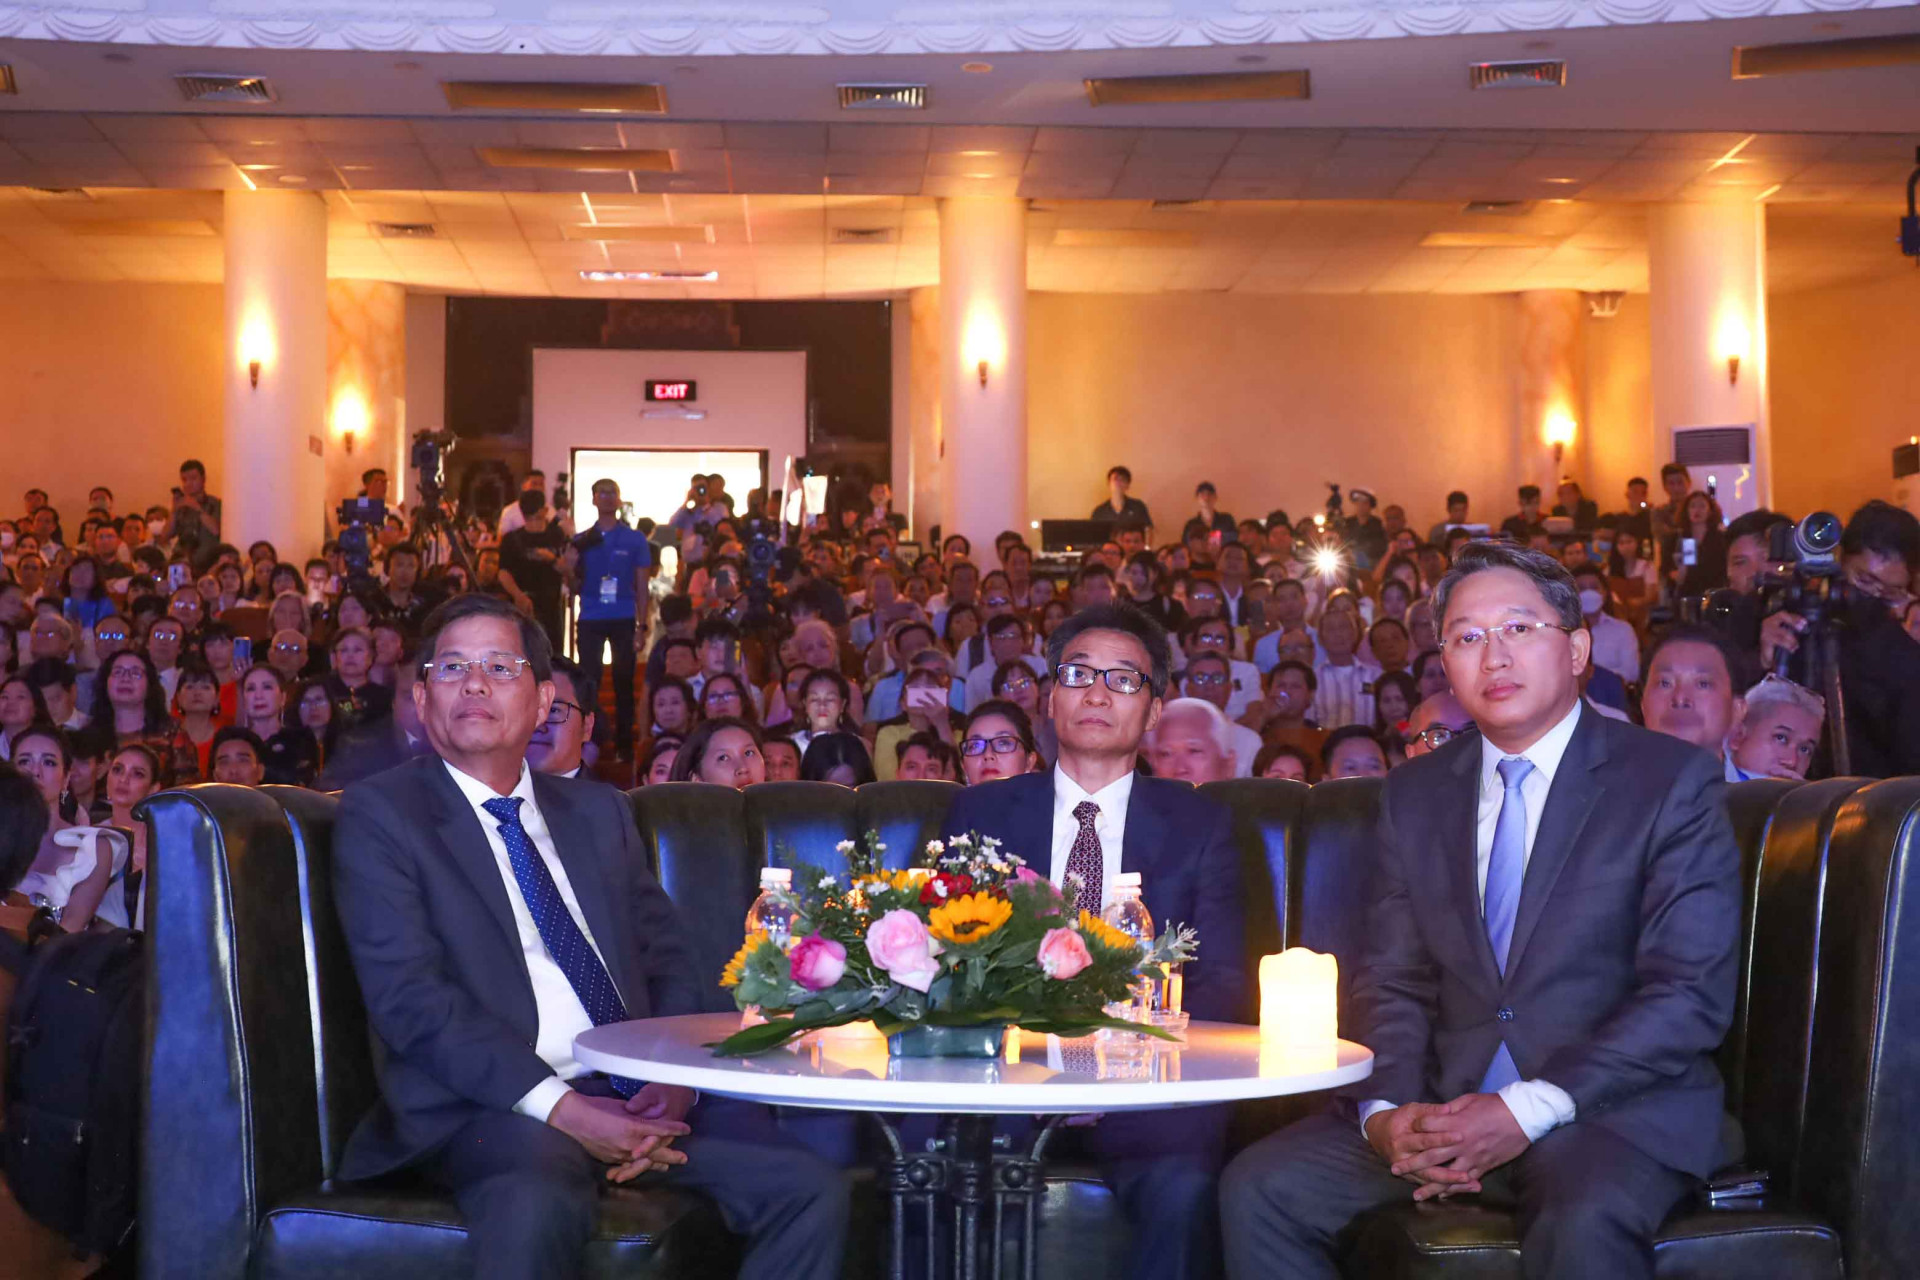 Deputy Prime Minister Vu Duc Dam (middle) and leaderships of Khanh Hoa Province attend the awarding ceremony